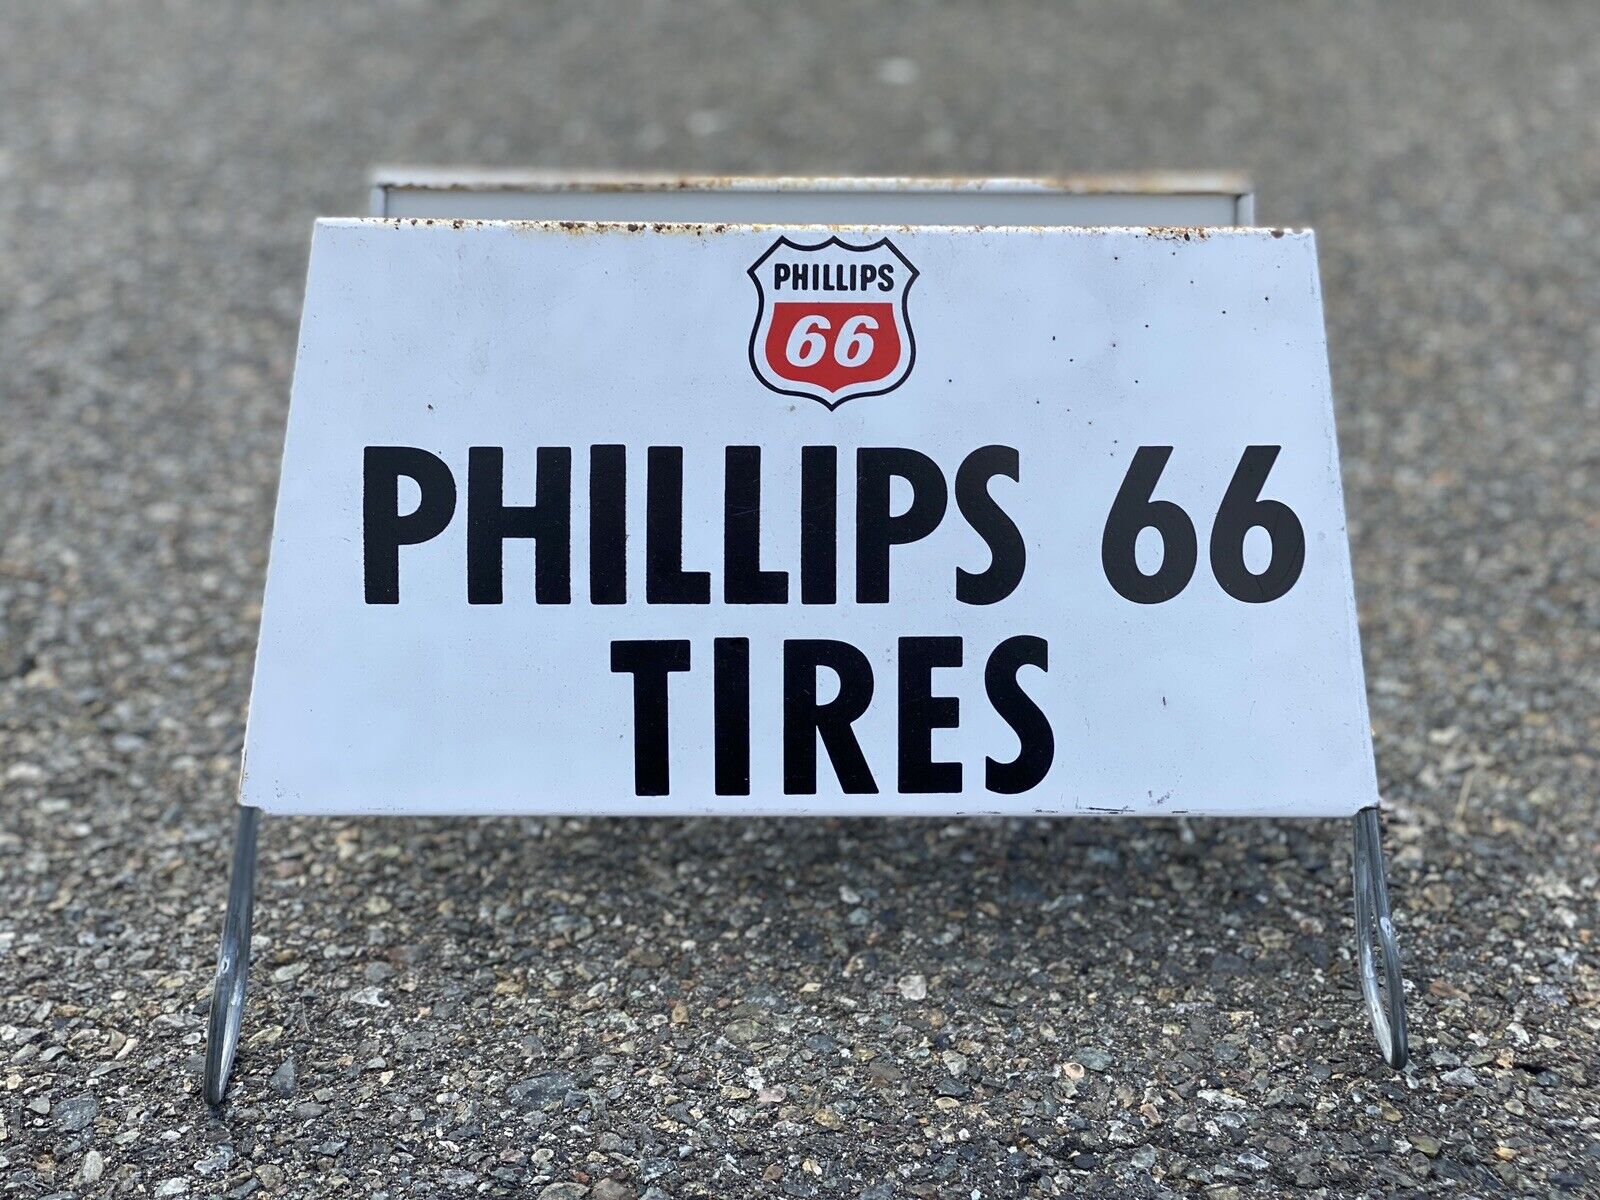 Vintage Phillips 66 Tires Porcelain Tire Stand Advertising Old Car Collectible